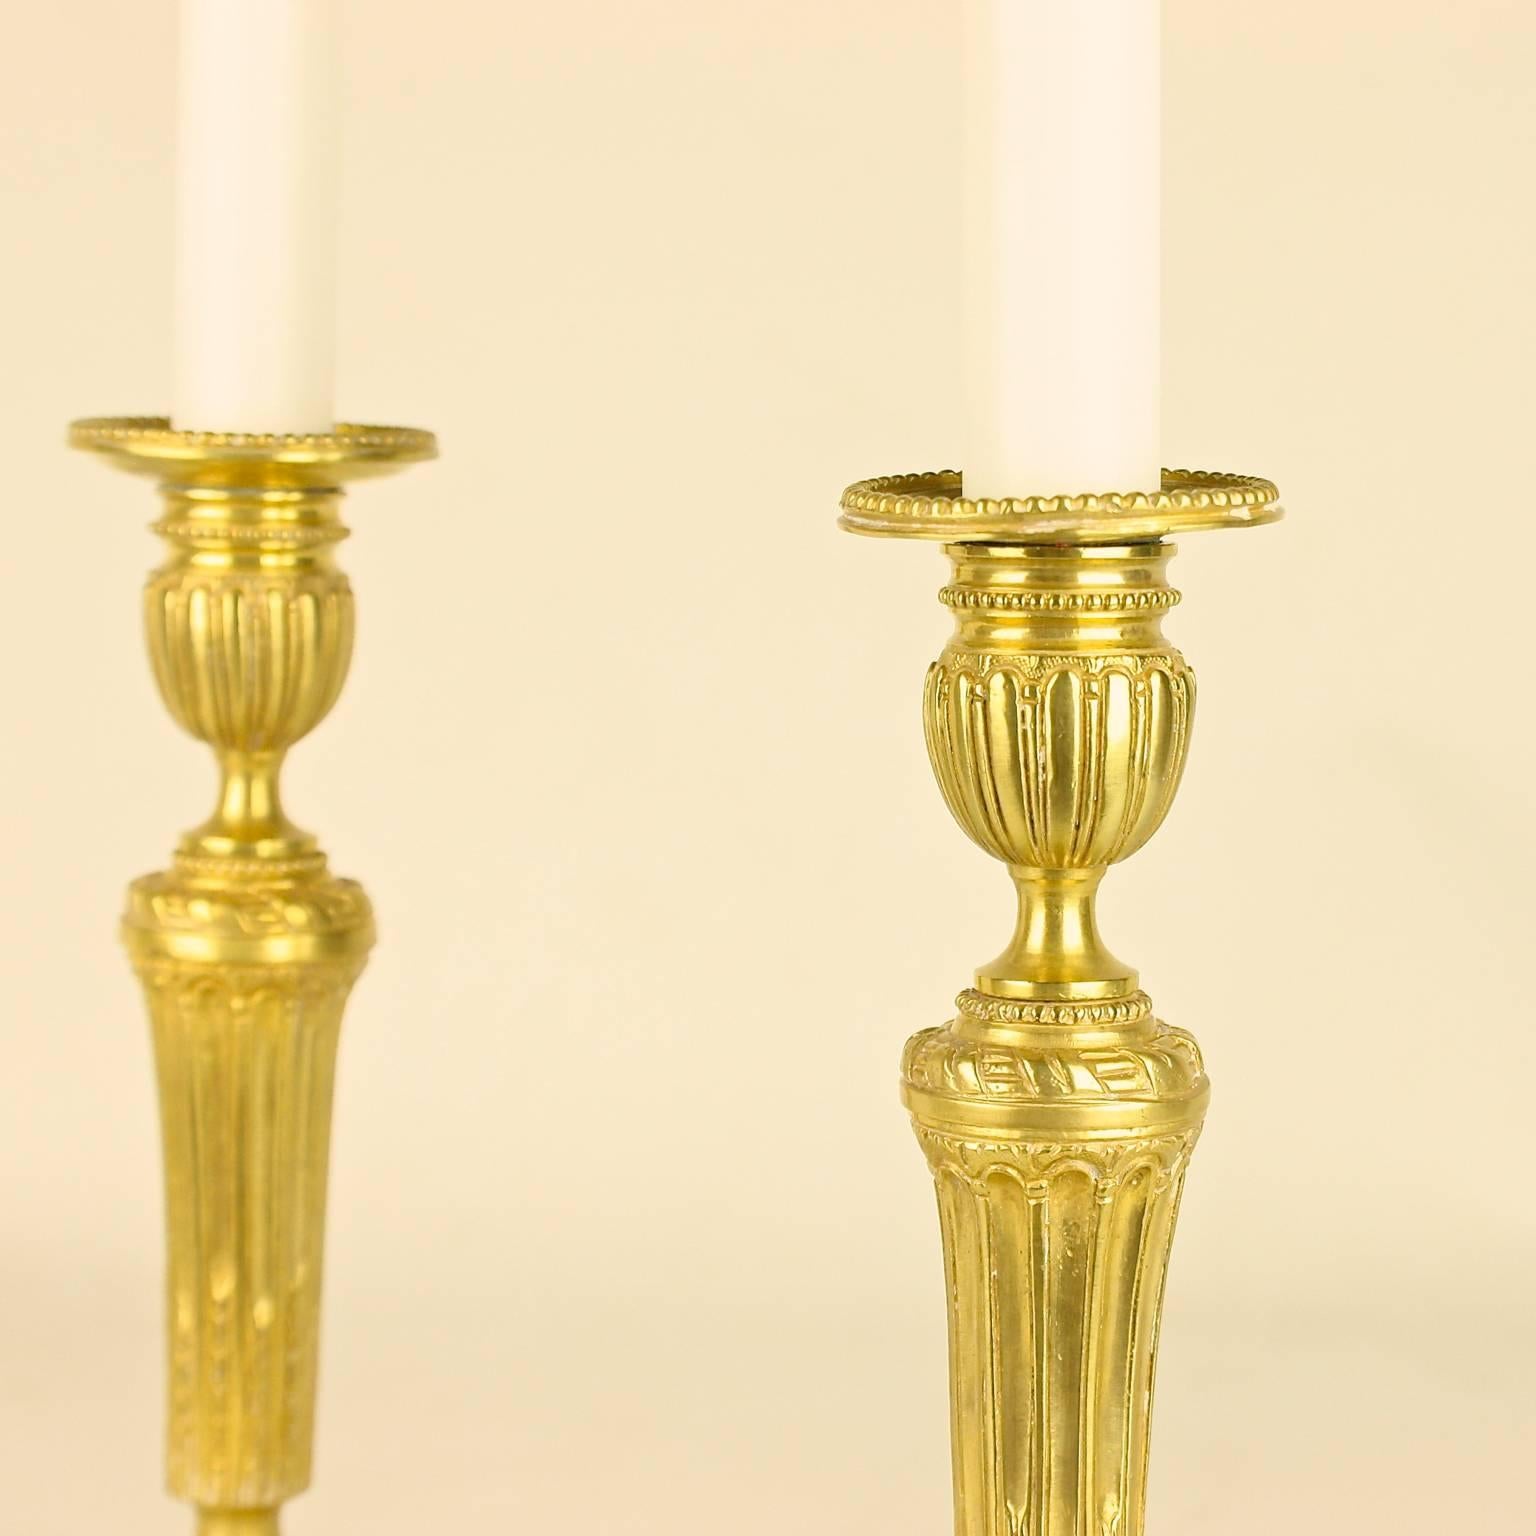 Pair of finely cast candlesticks, each with a tapering fluted stem surmounted by a ribbon tied garland, the gadrooned candle nozzles corresponding to the gadrooned circular doomed bases.
Candlesticks were in frequent use and thus required regular